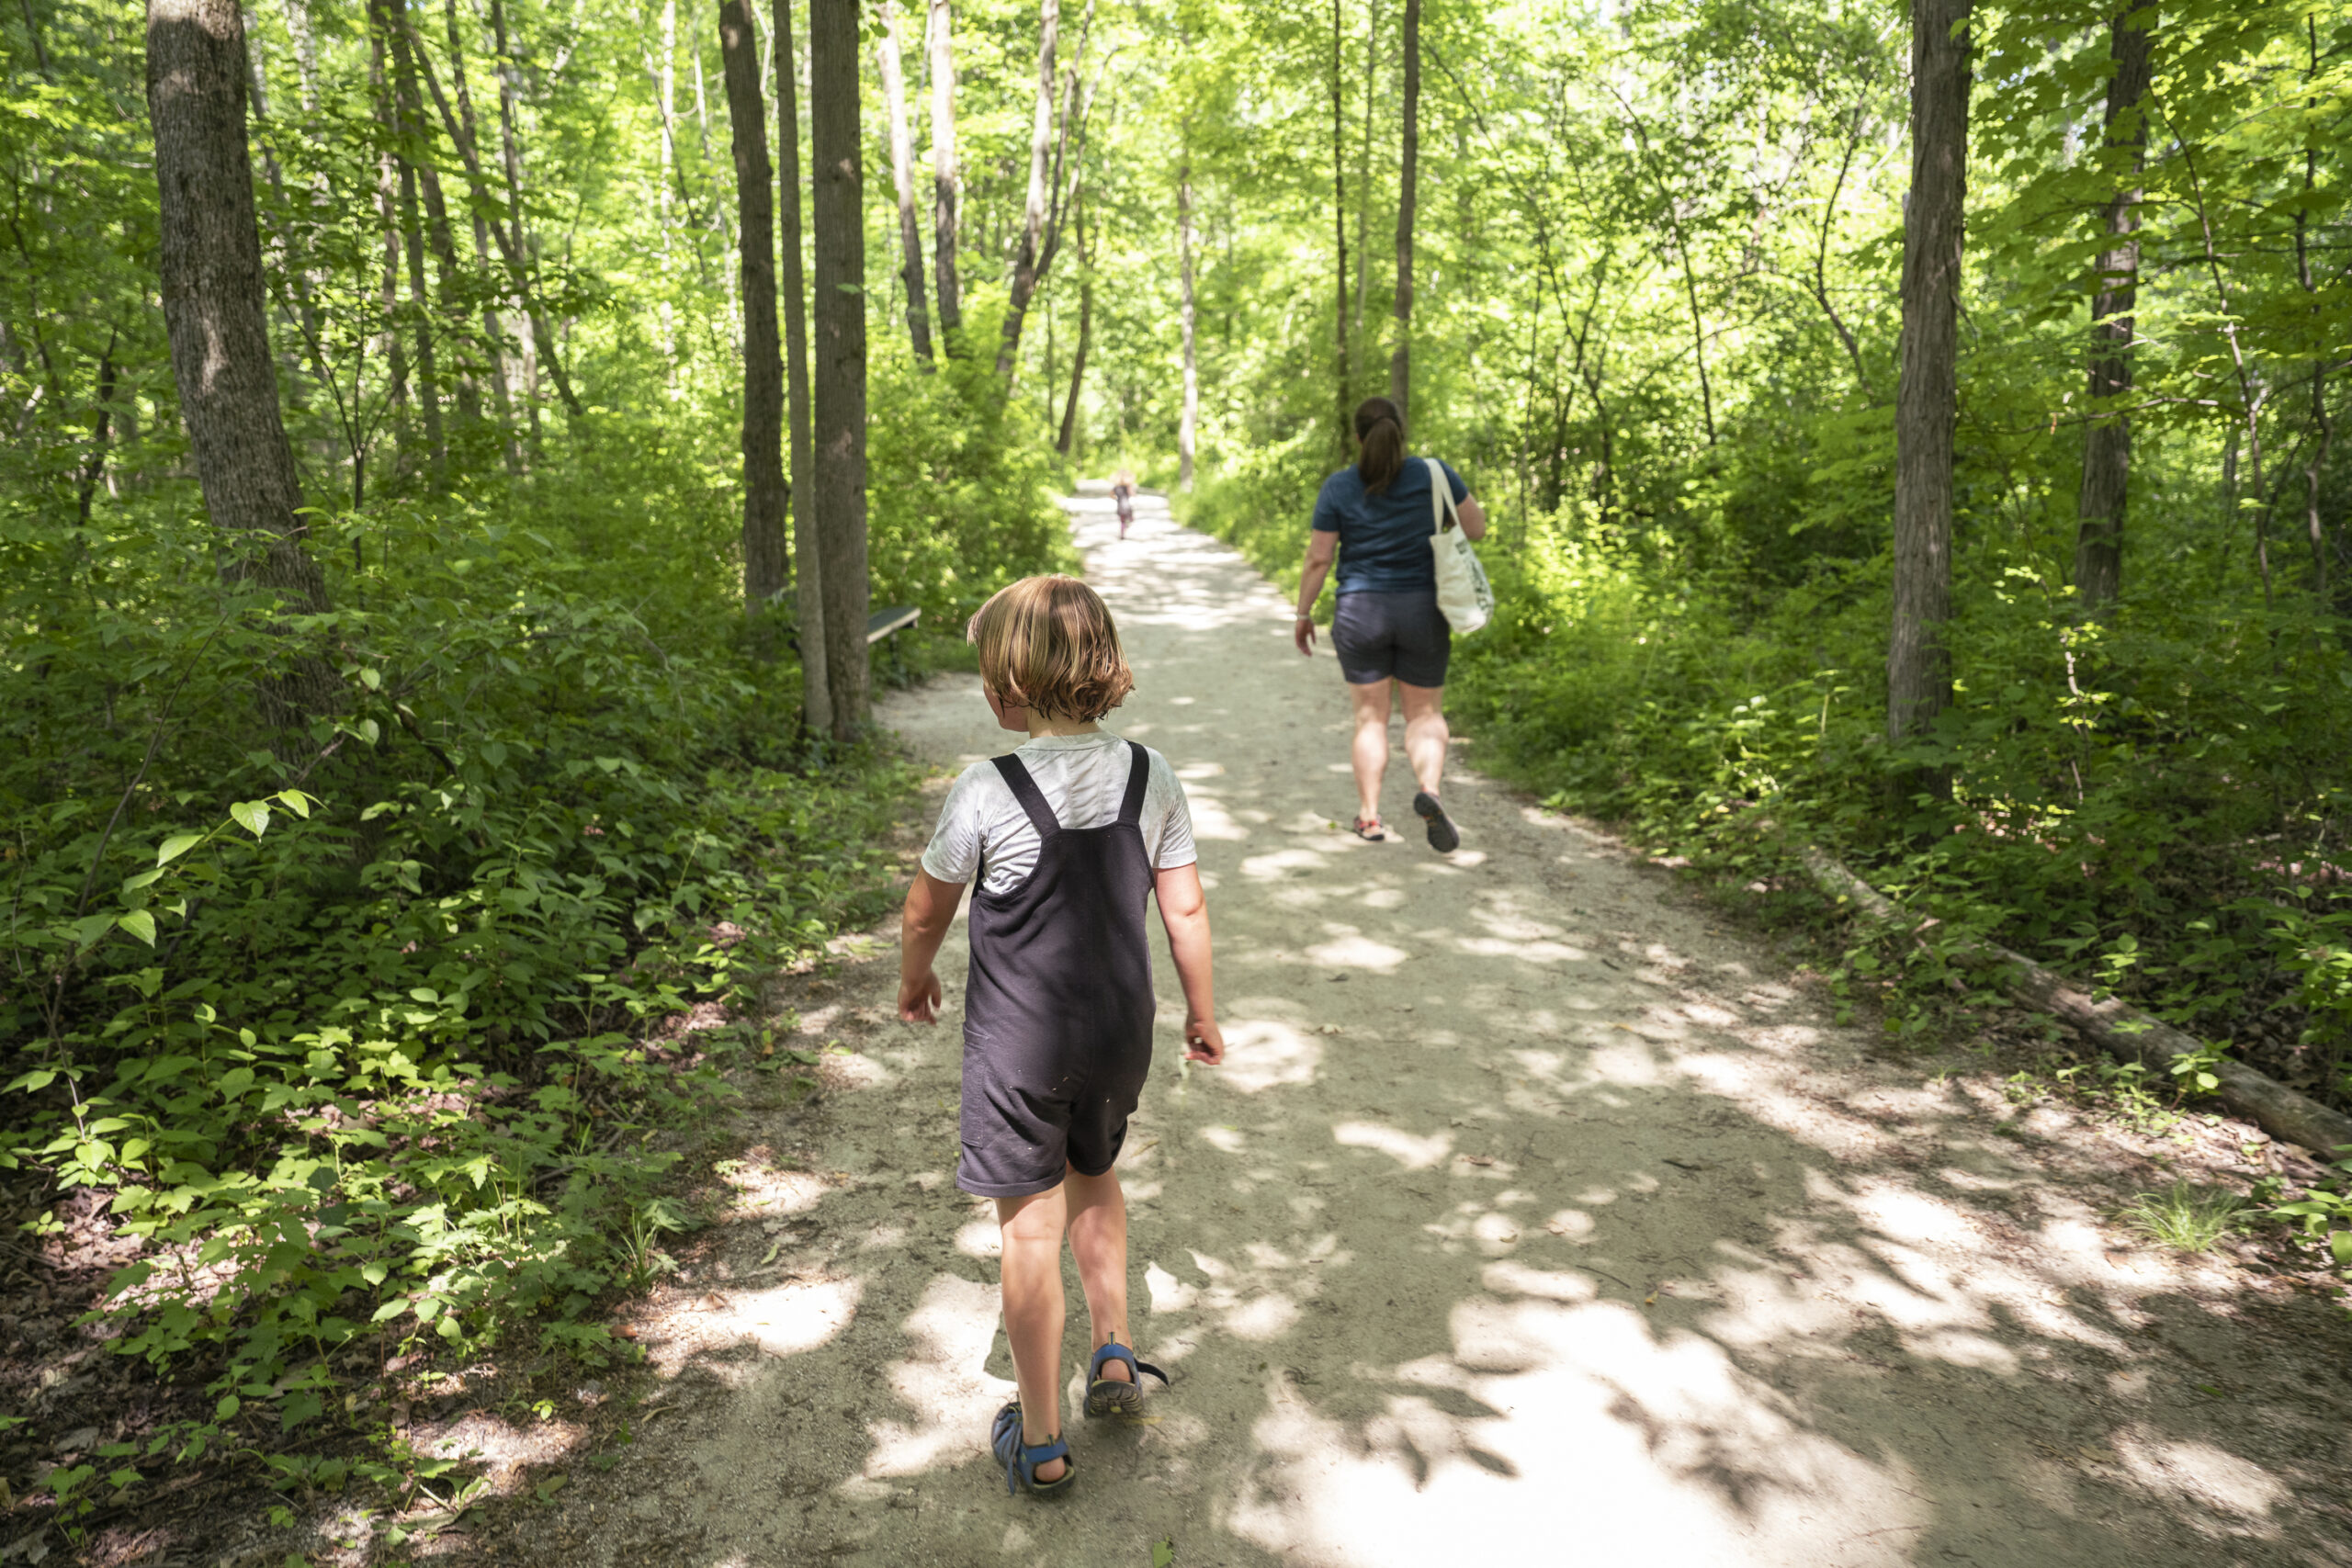 A child and a parent walk down a trail with trees on either side